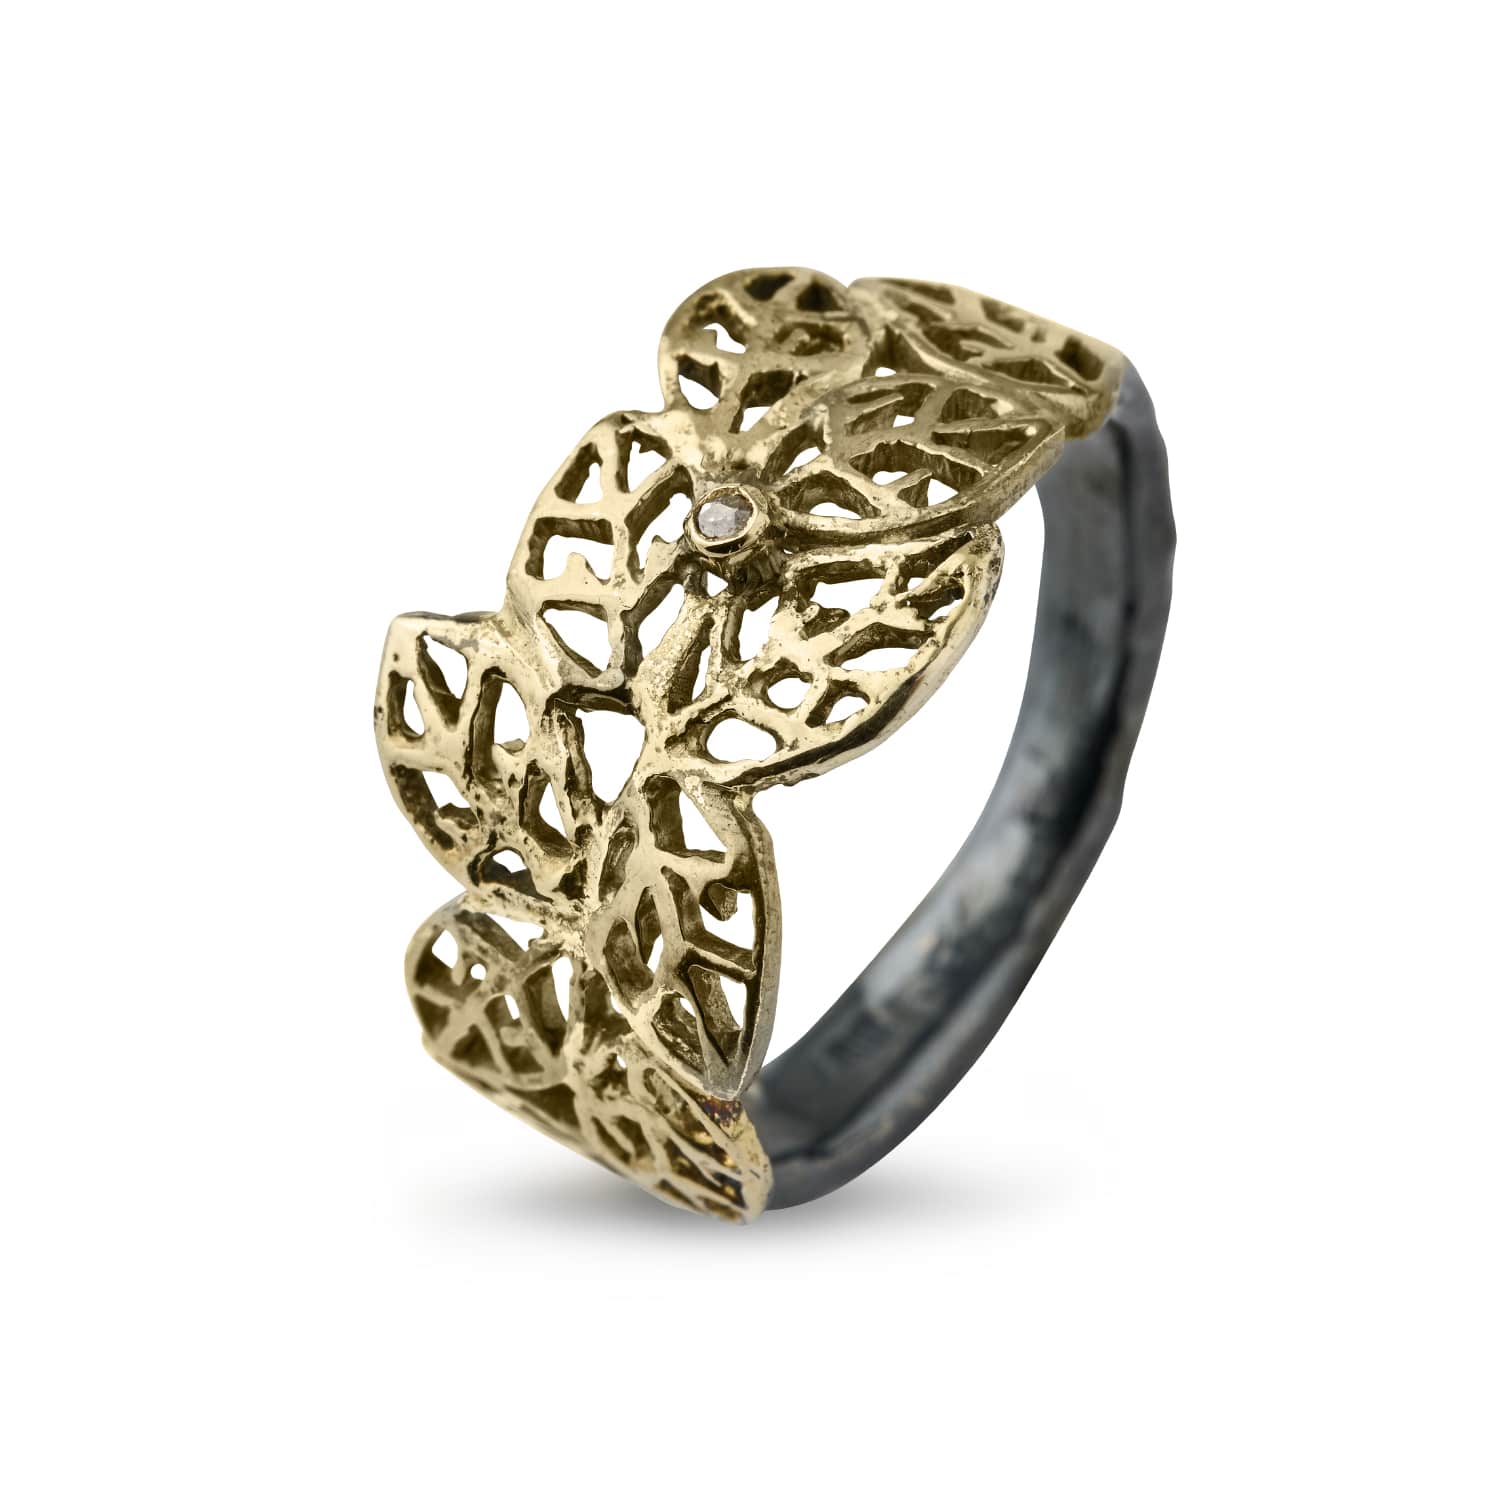 Leaf ring consisting of gold and silver